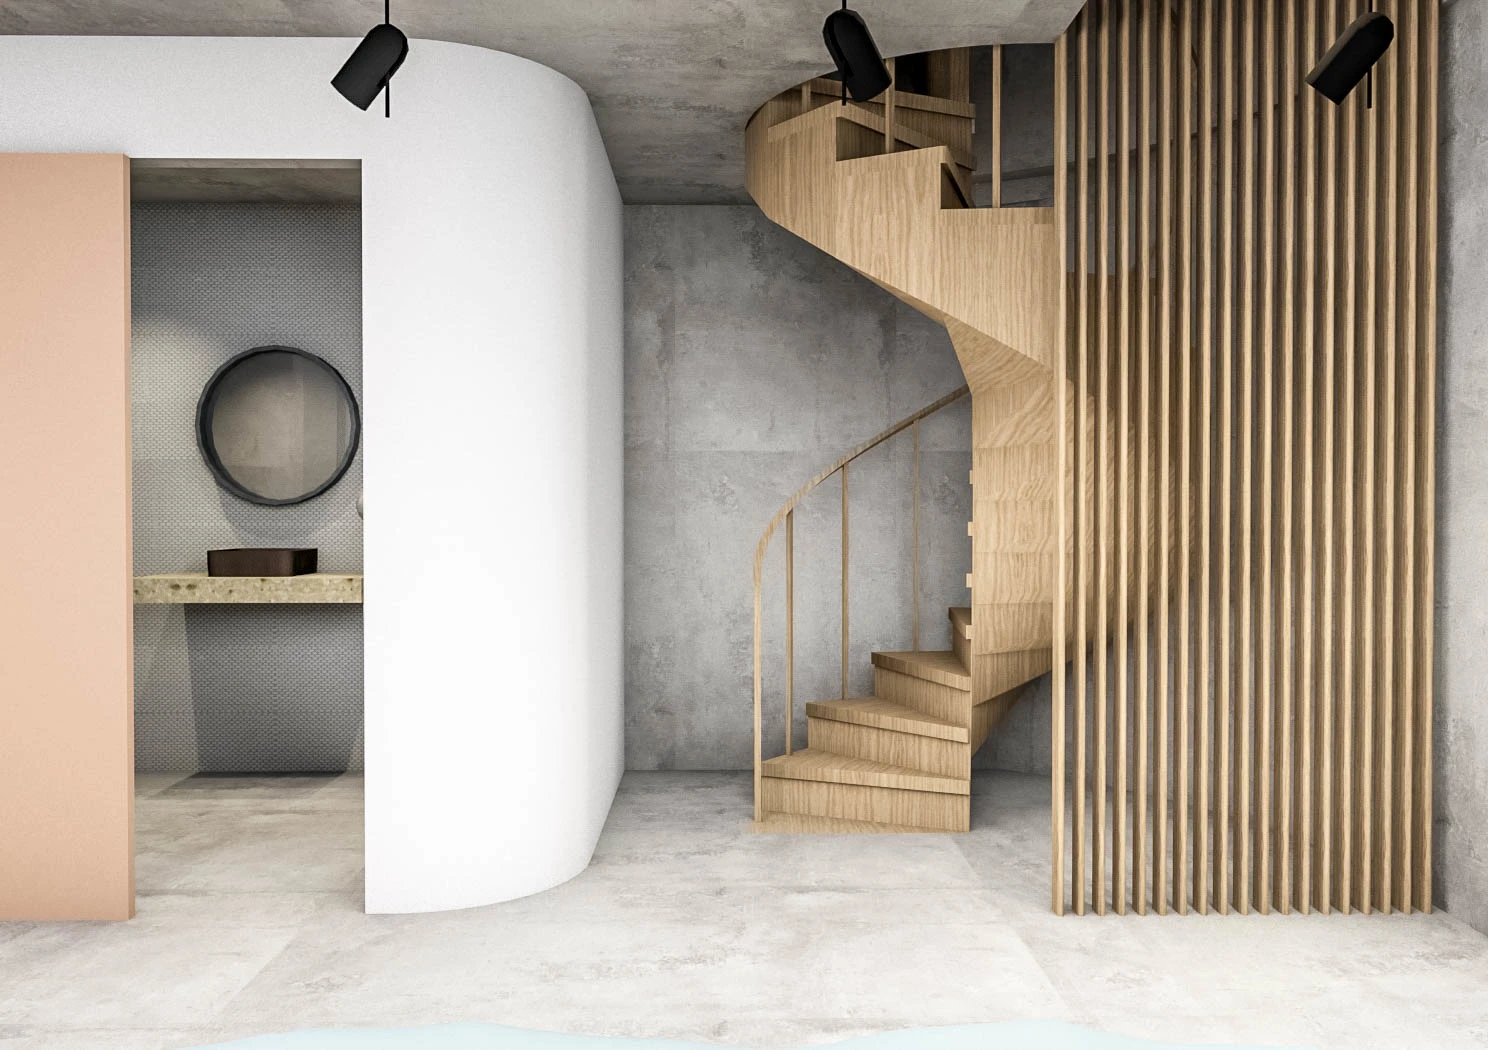 Timber spiral staircase with concrete wall and floor